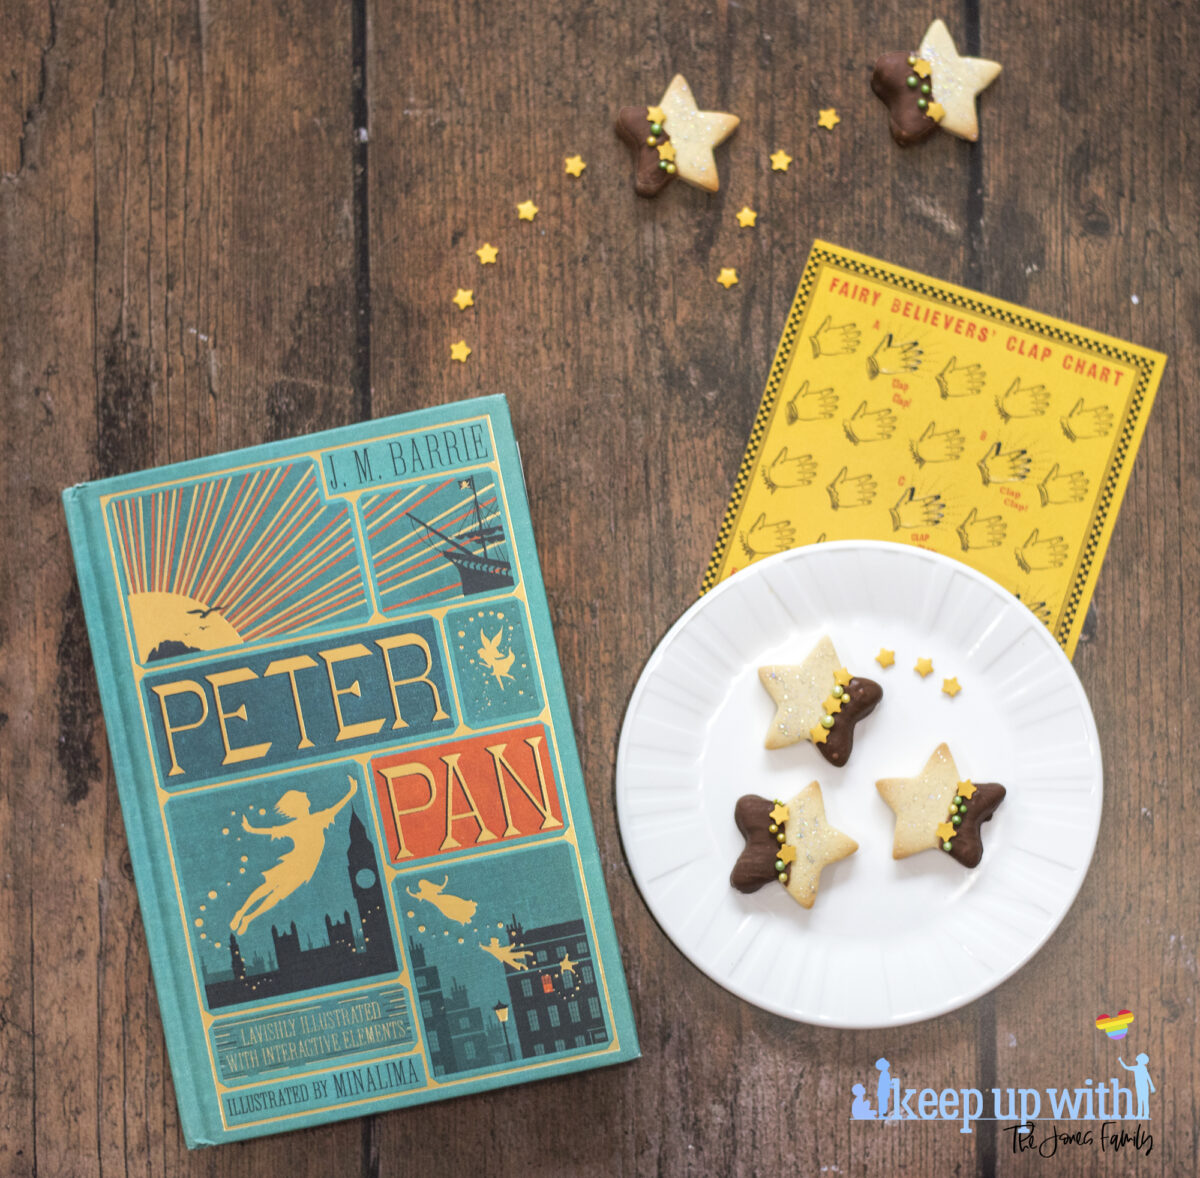 Image shows a wooden tabletop with a copy of J M Barrie's Peter Pan, a small white Vera Wang Wedgewood plate and a fairy clapping chart,  On the table are small star shaped biscuits. Half of each Peter Pan Second Star to the Right Biscuit is dipped in chocolate and  the other is sprinkled with silver edible glitter.  The dividing line is decorated with yellow star sprinkles and green pearl shaped sprinkles. Image by Keep Up With The Jones Family